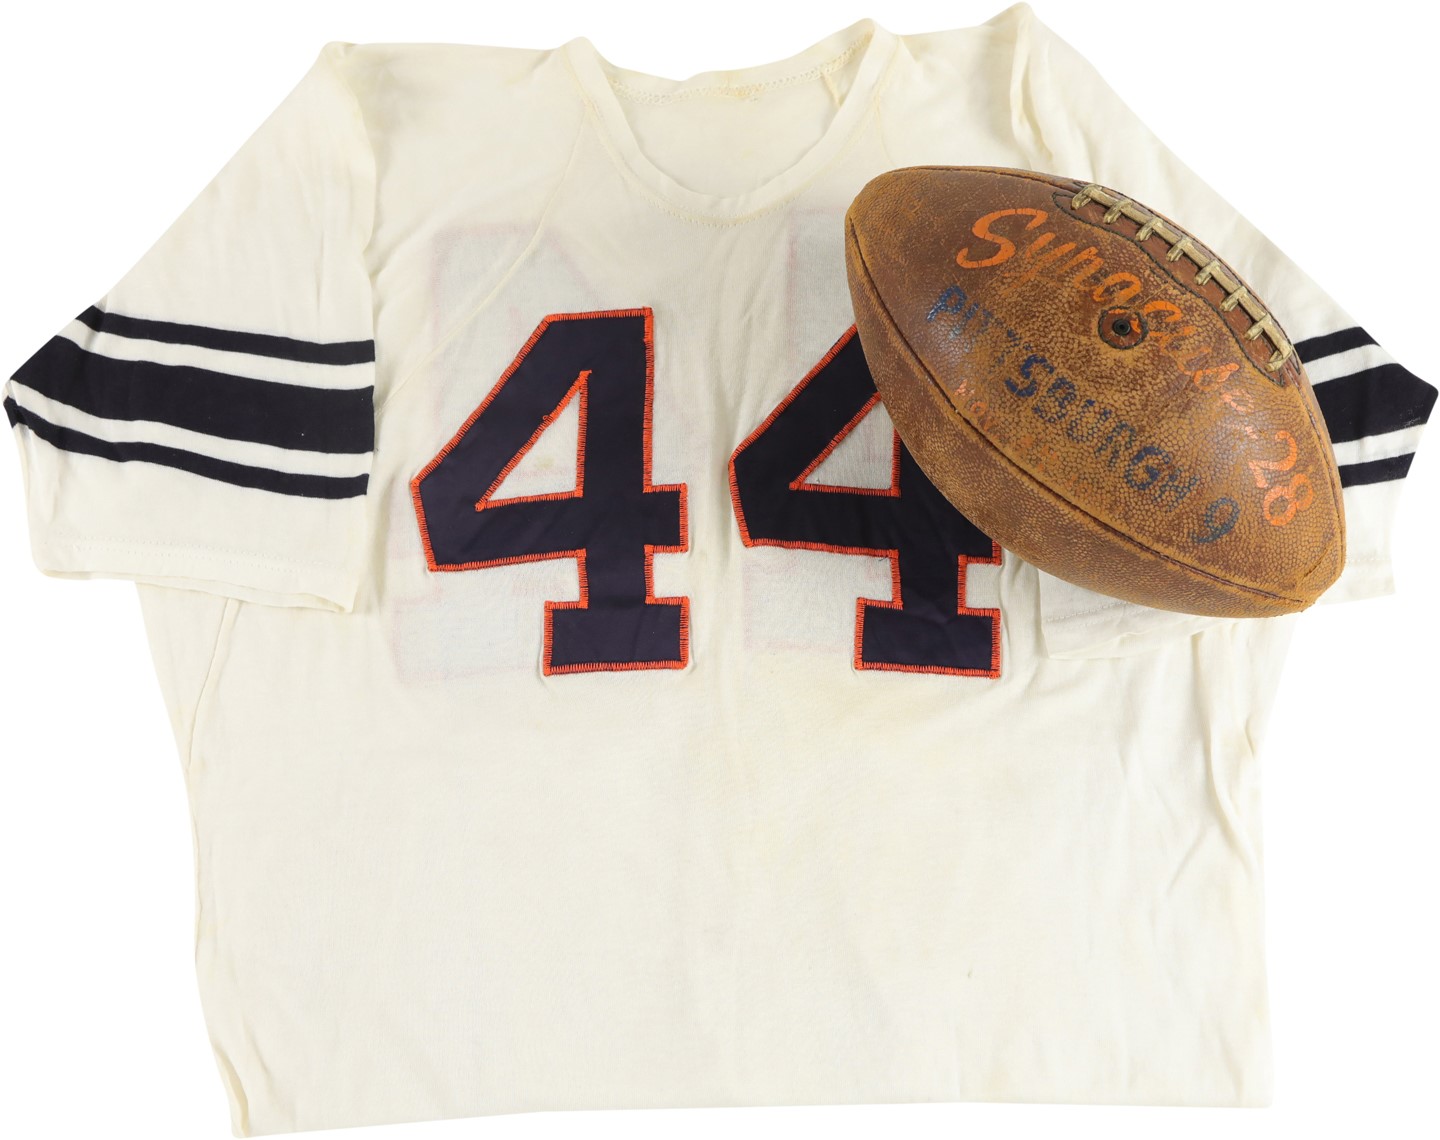 - 11/4/1961 Ernie Davis Syracuse vs. Pittsburgh Game Worn Jersey and Game Ball - Heisman Trophy Season (Gifted Directly by Ernie Davis with Photo Proof)